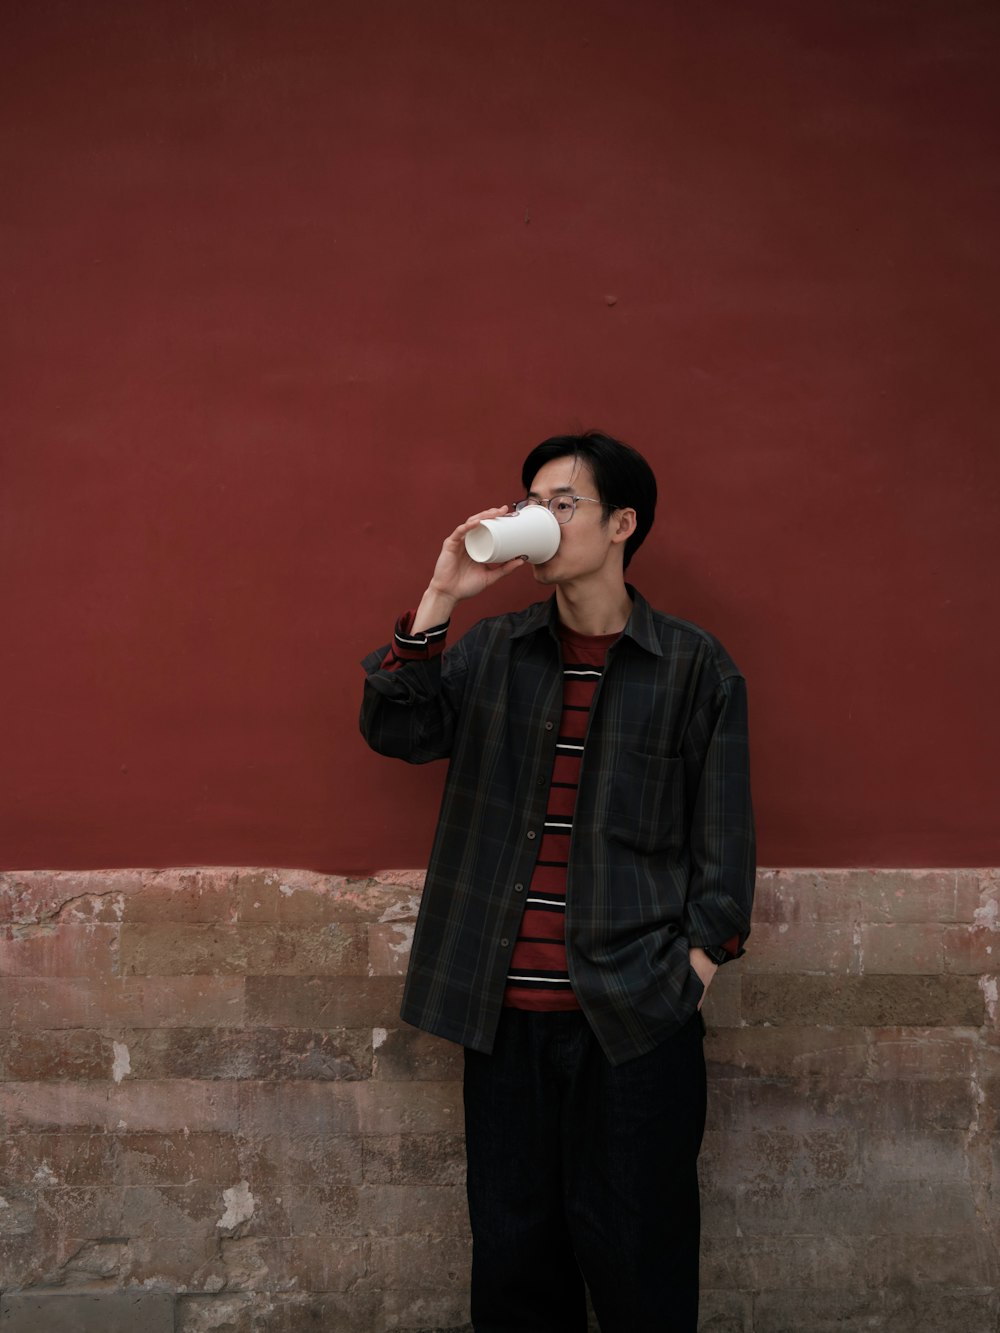 a man standing next to a red wall drinking from a cup